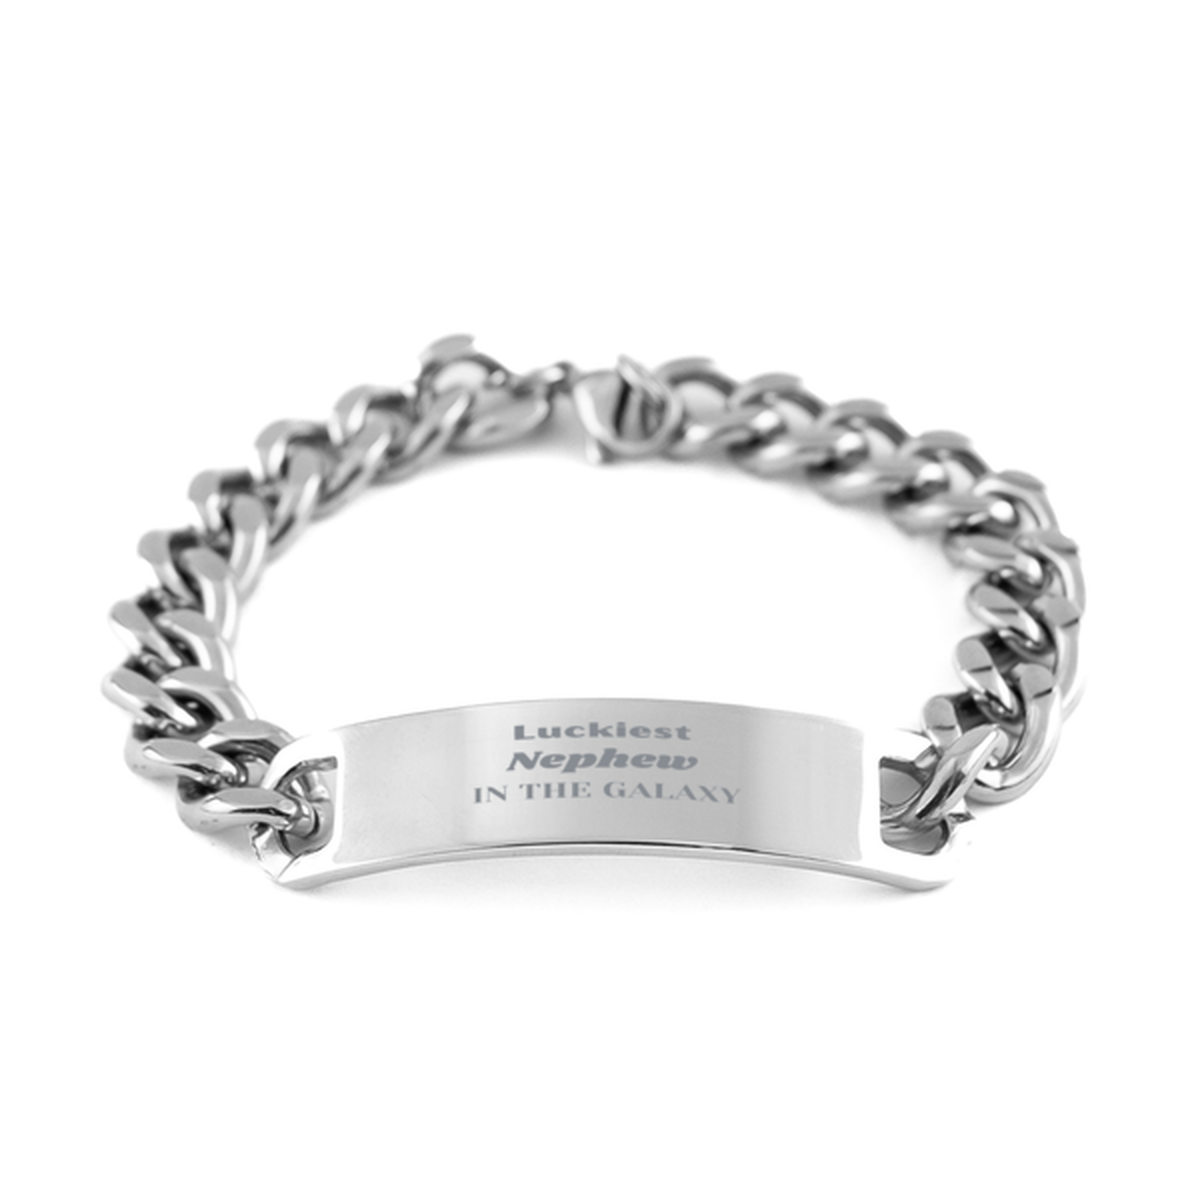 Luckiest Nephew in the Galaxy, To My Nephew Engraved Gifts, Christmas Nephew Cuban Chain Stainless Steel Bracelet Gifts, X-mas Birthday Unique Gifts For Nephew Men Women